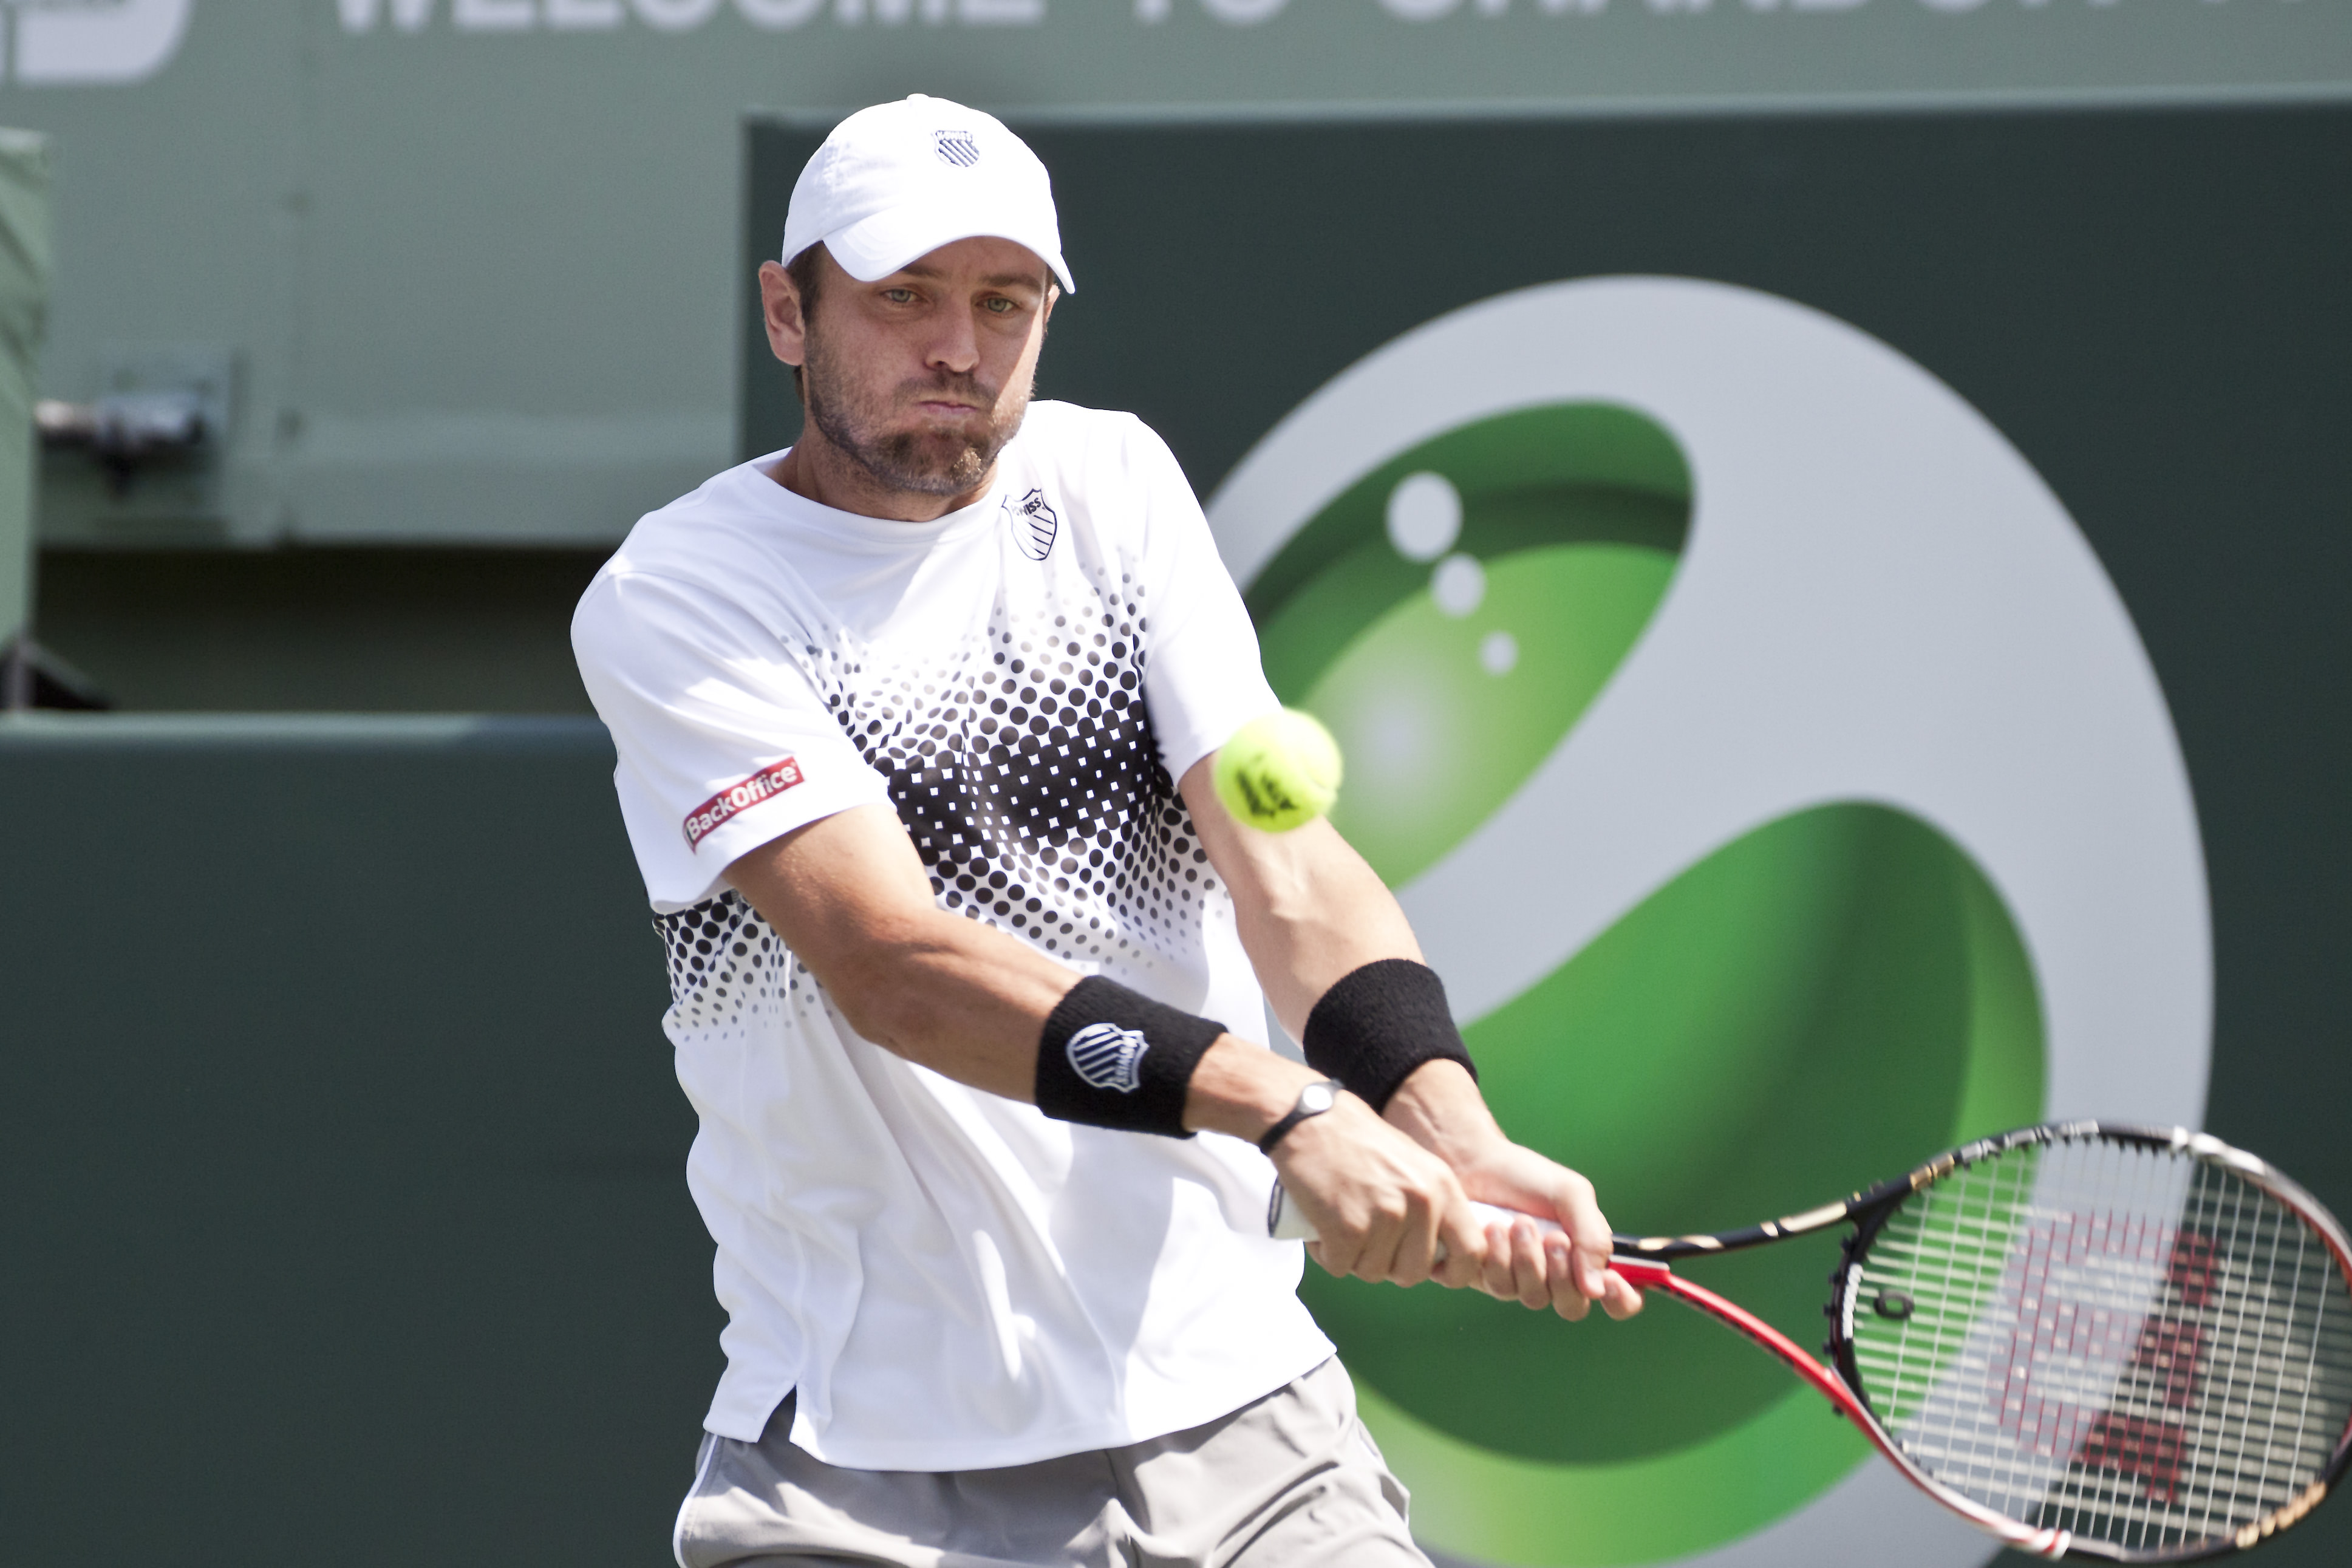 Fish to Headline ATP Delray Champions Event; Pre-Qualie Tennis Results